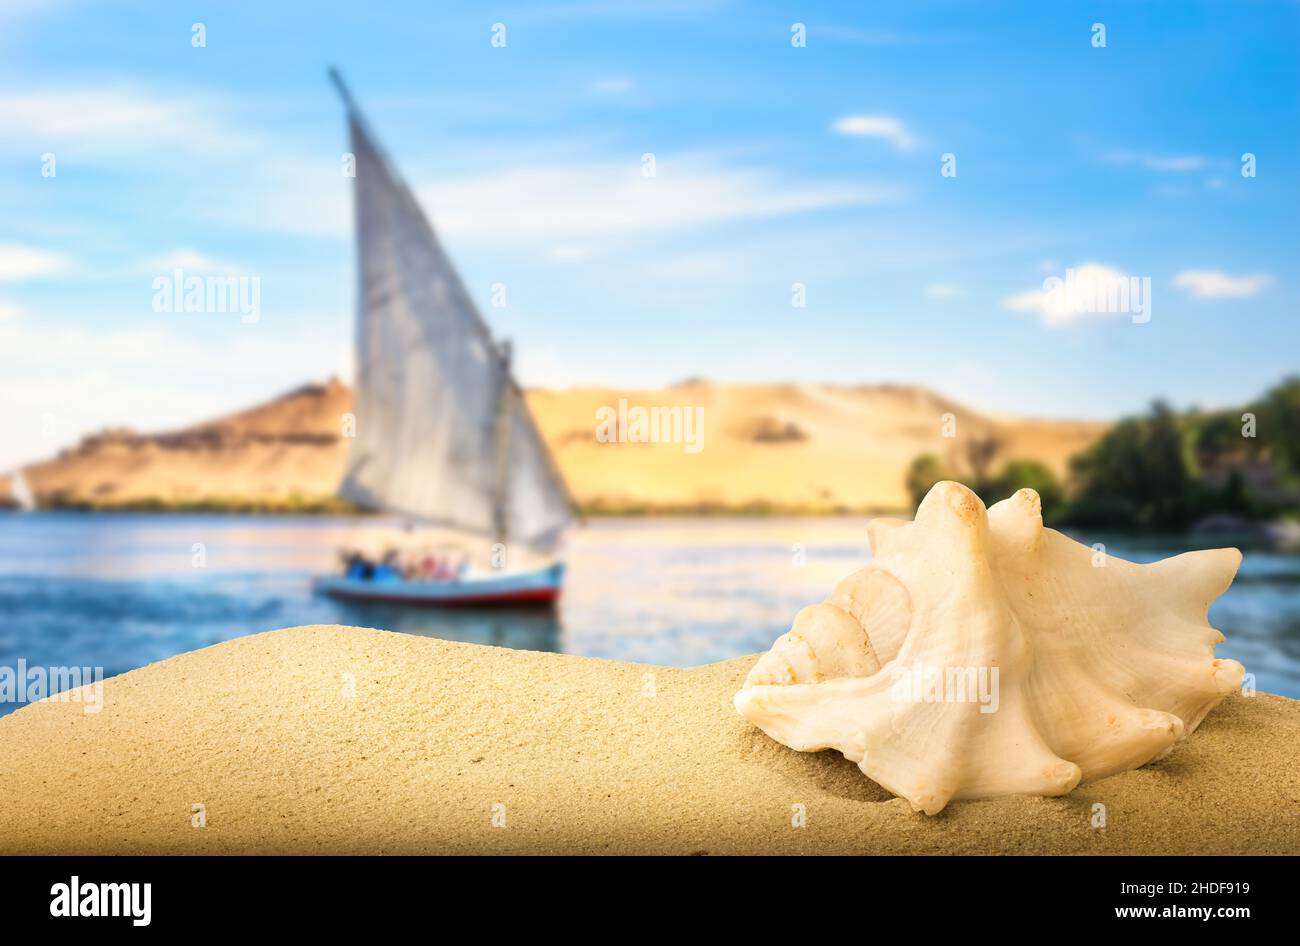 sand, mussel, nile river, sands, mussels, nile, nile rivers Stock Photo